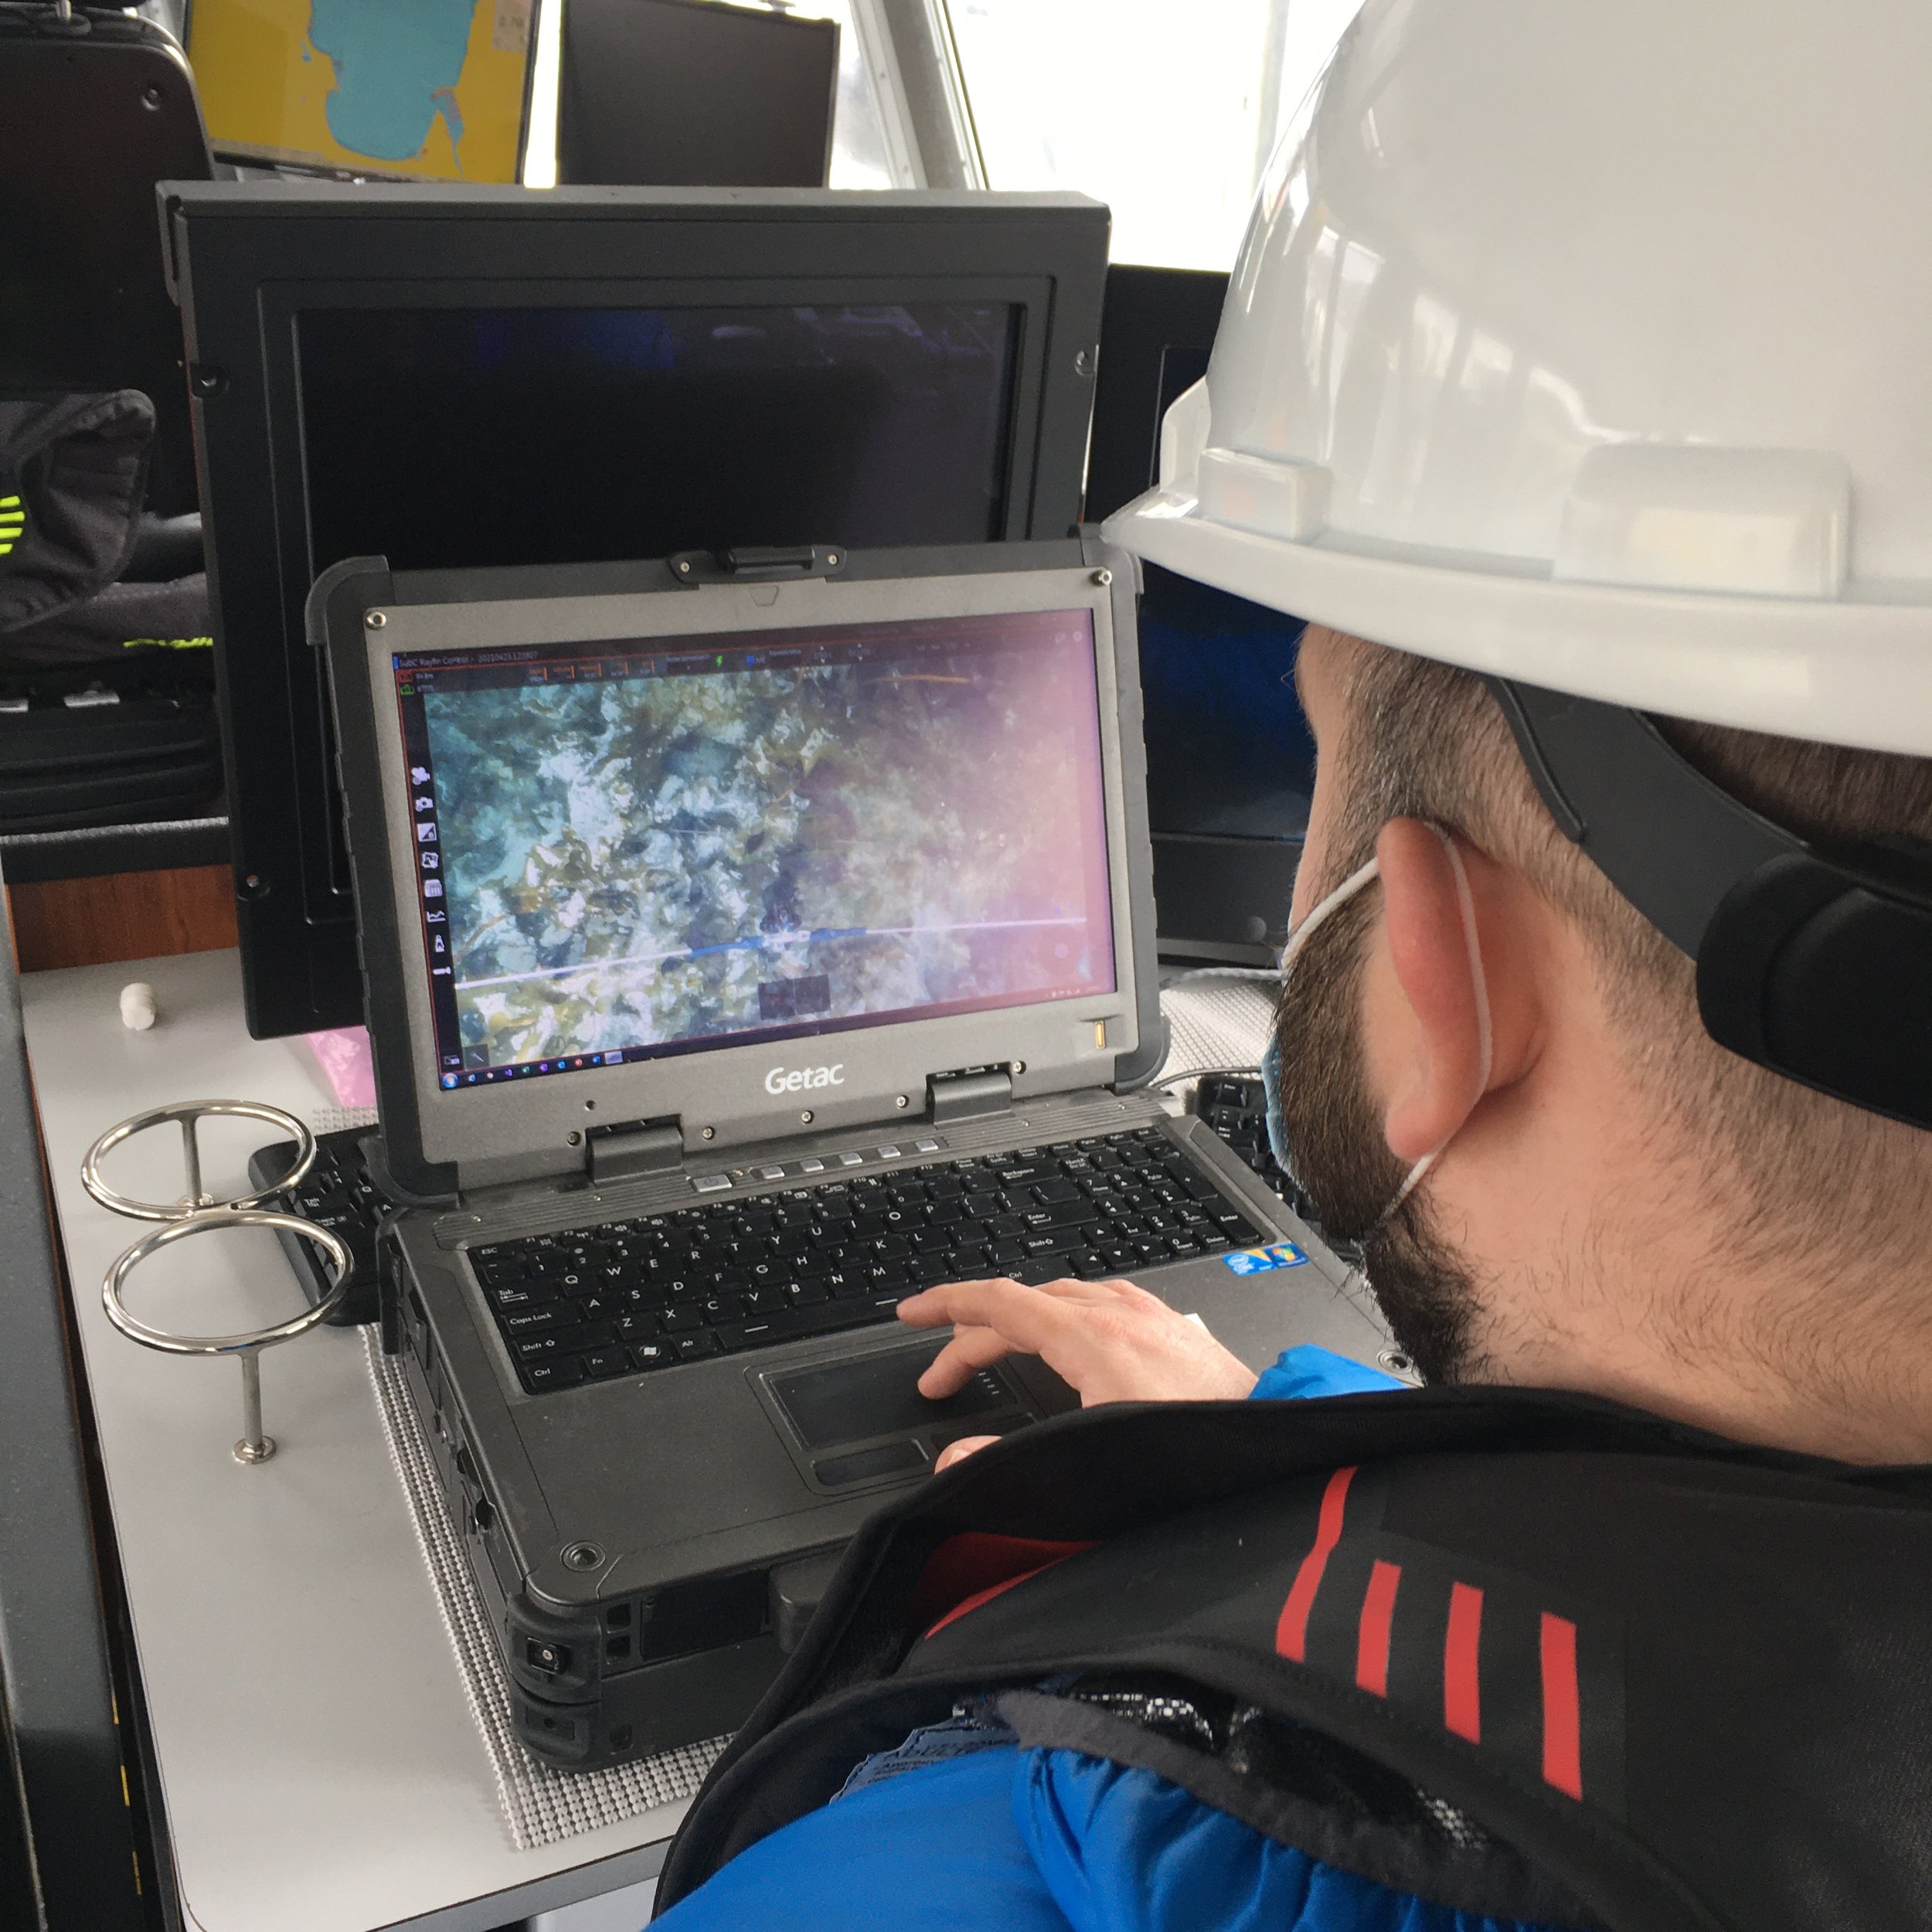 Man with hardhat looks at computer screen showing underwater video